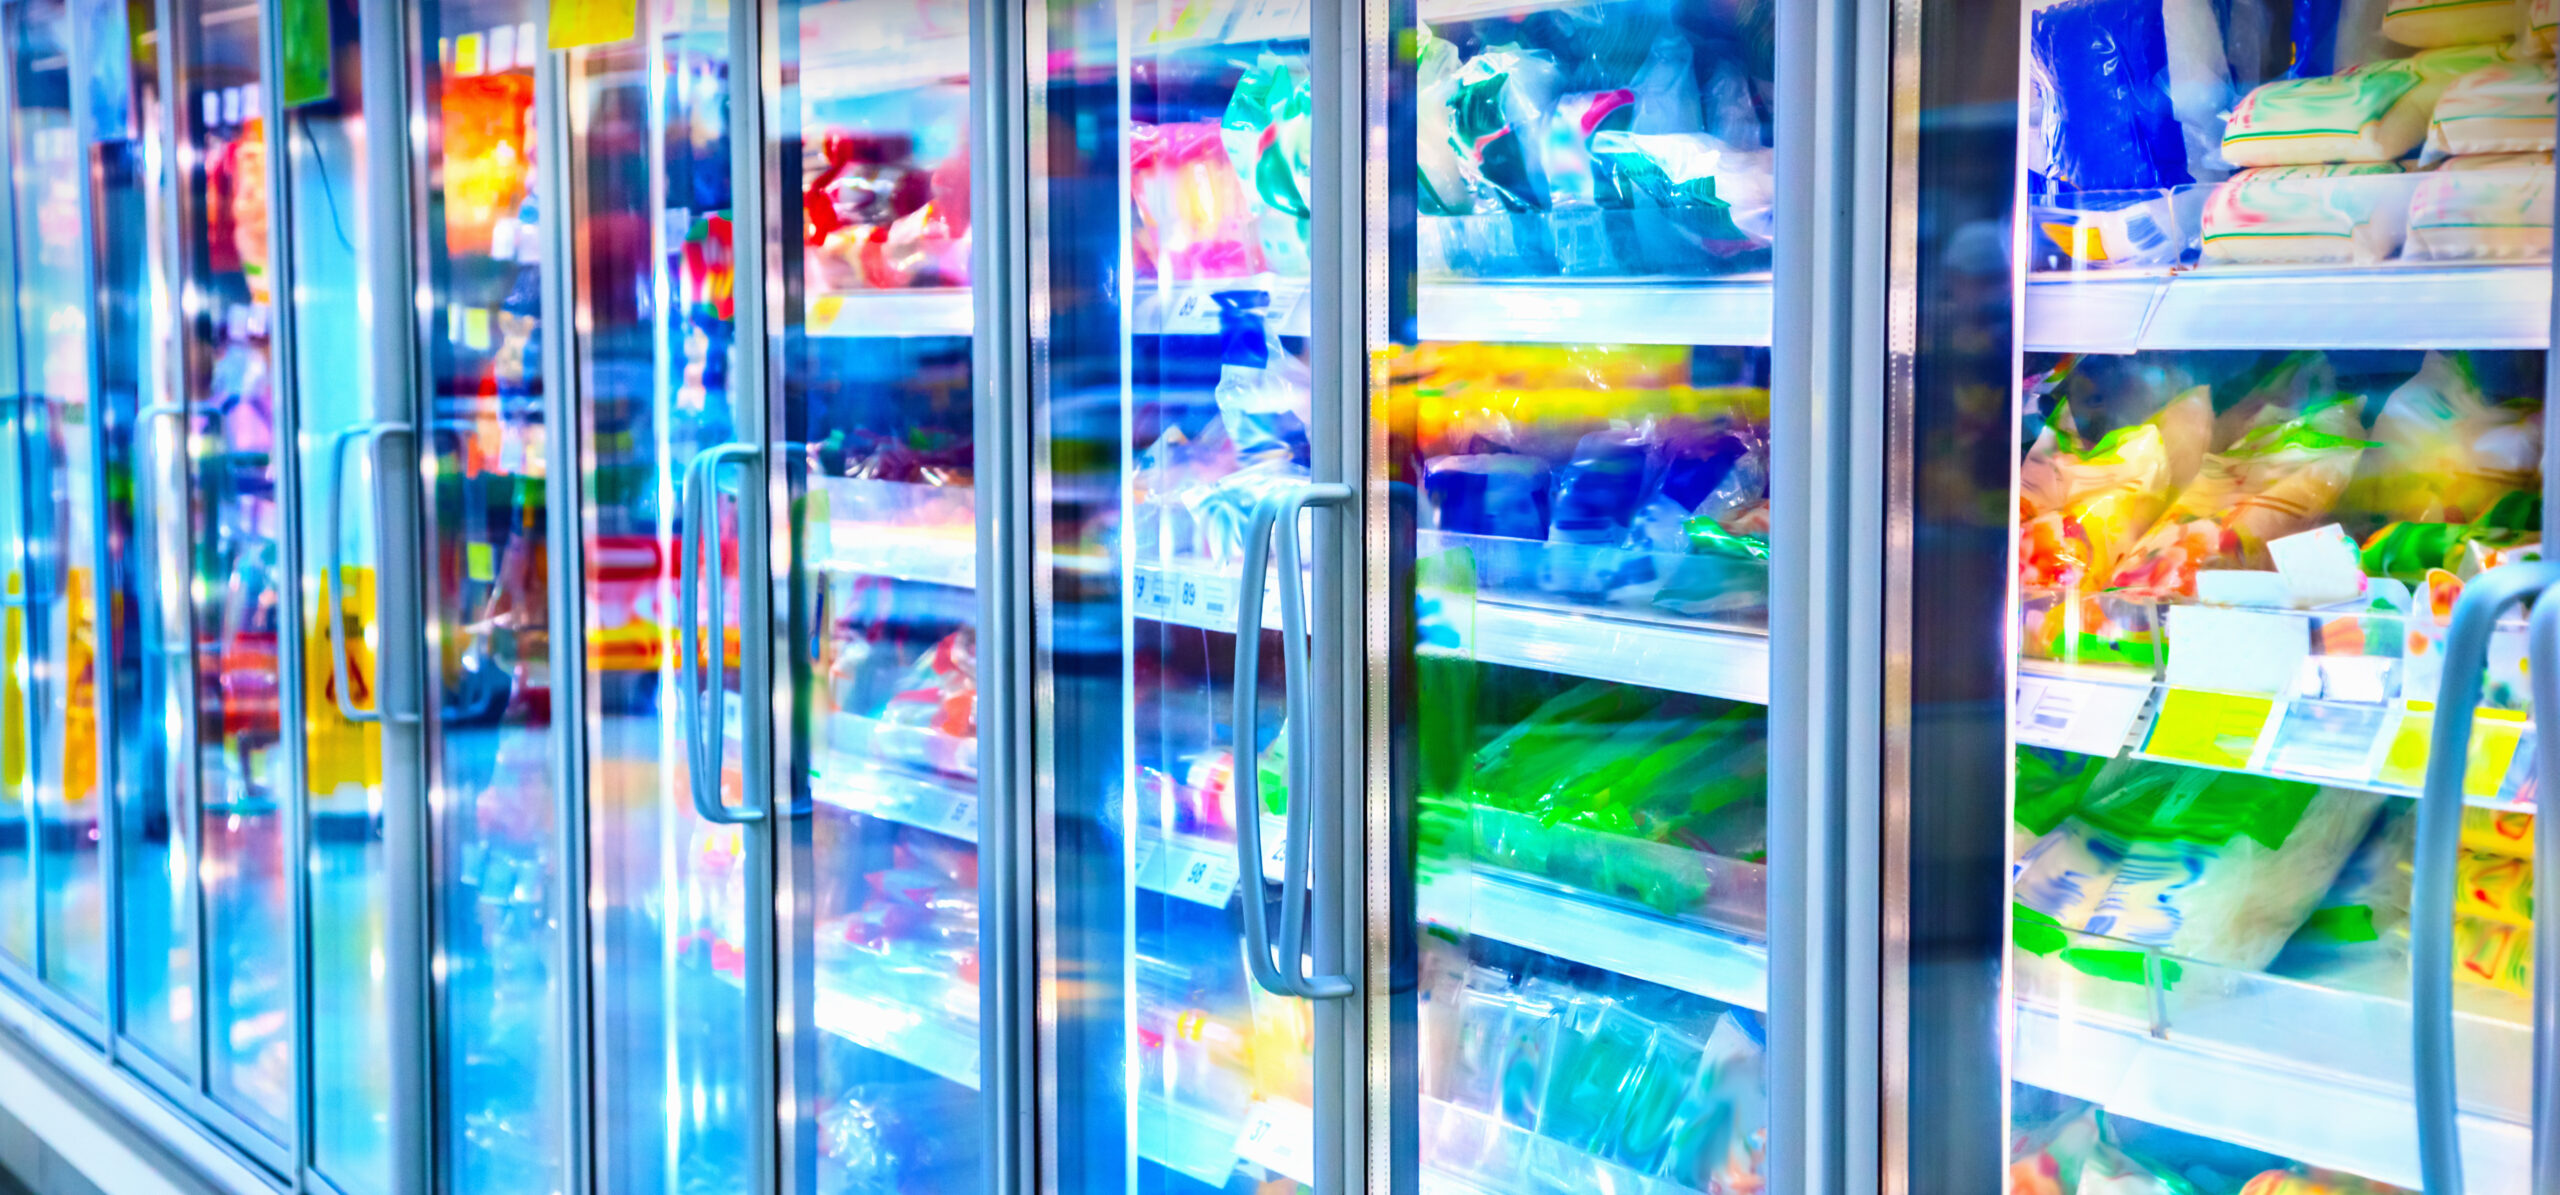 Frozen food renaissanc will make waves in grocery in 2019